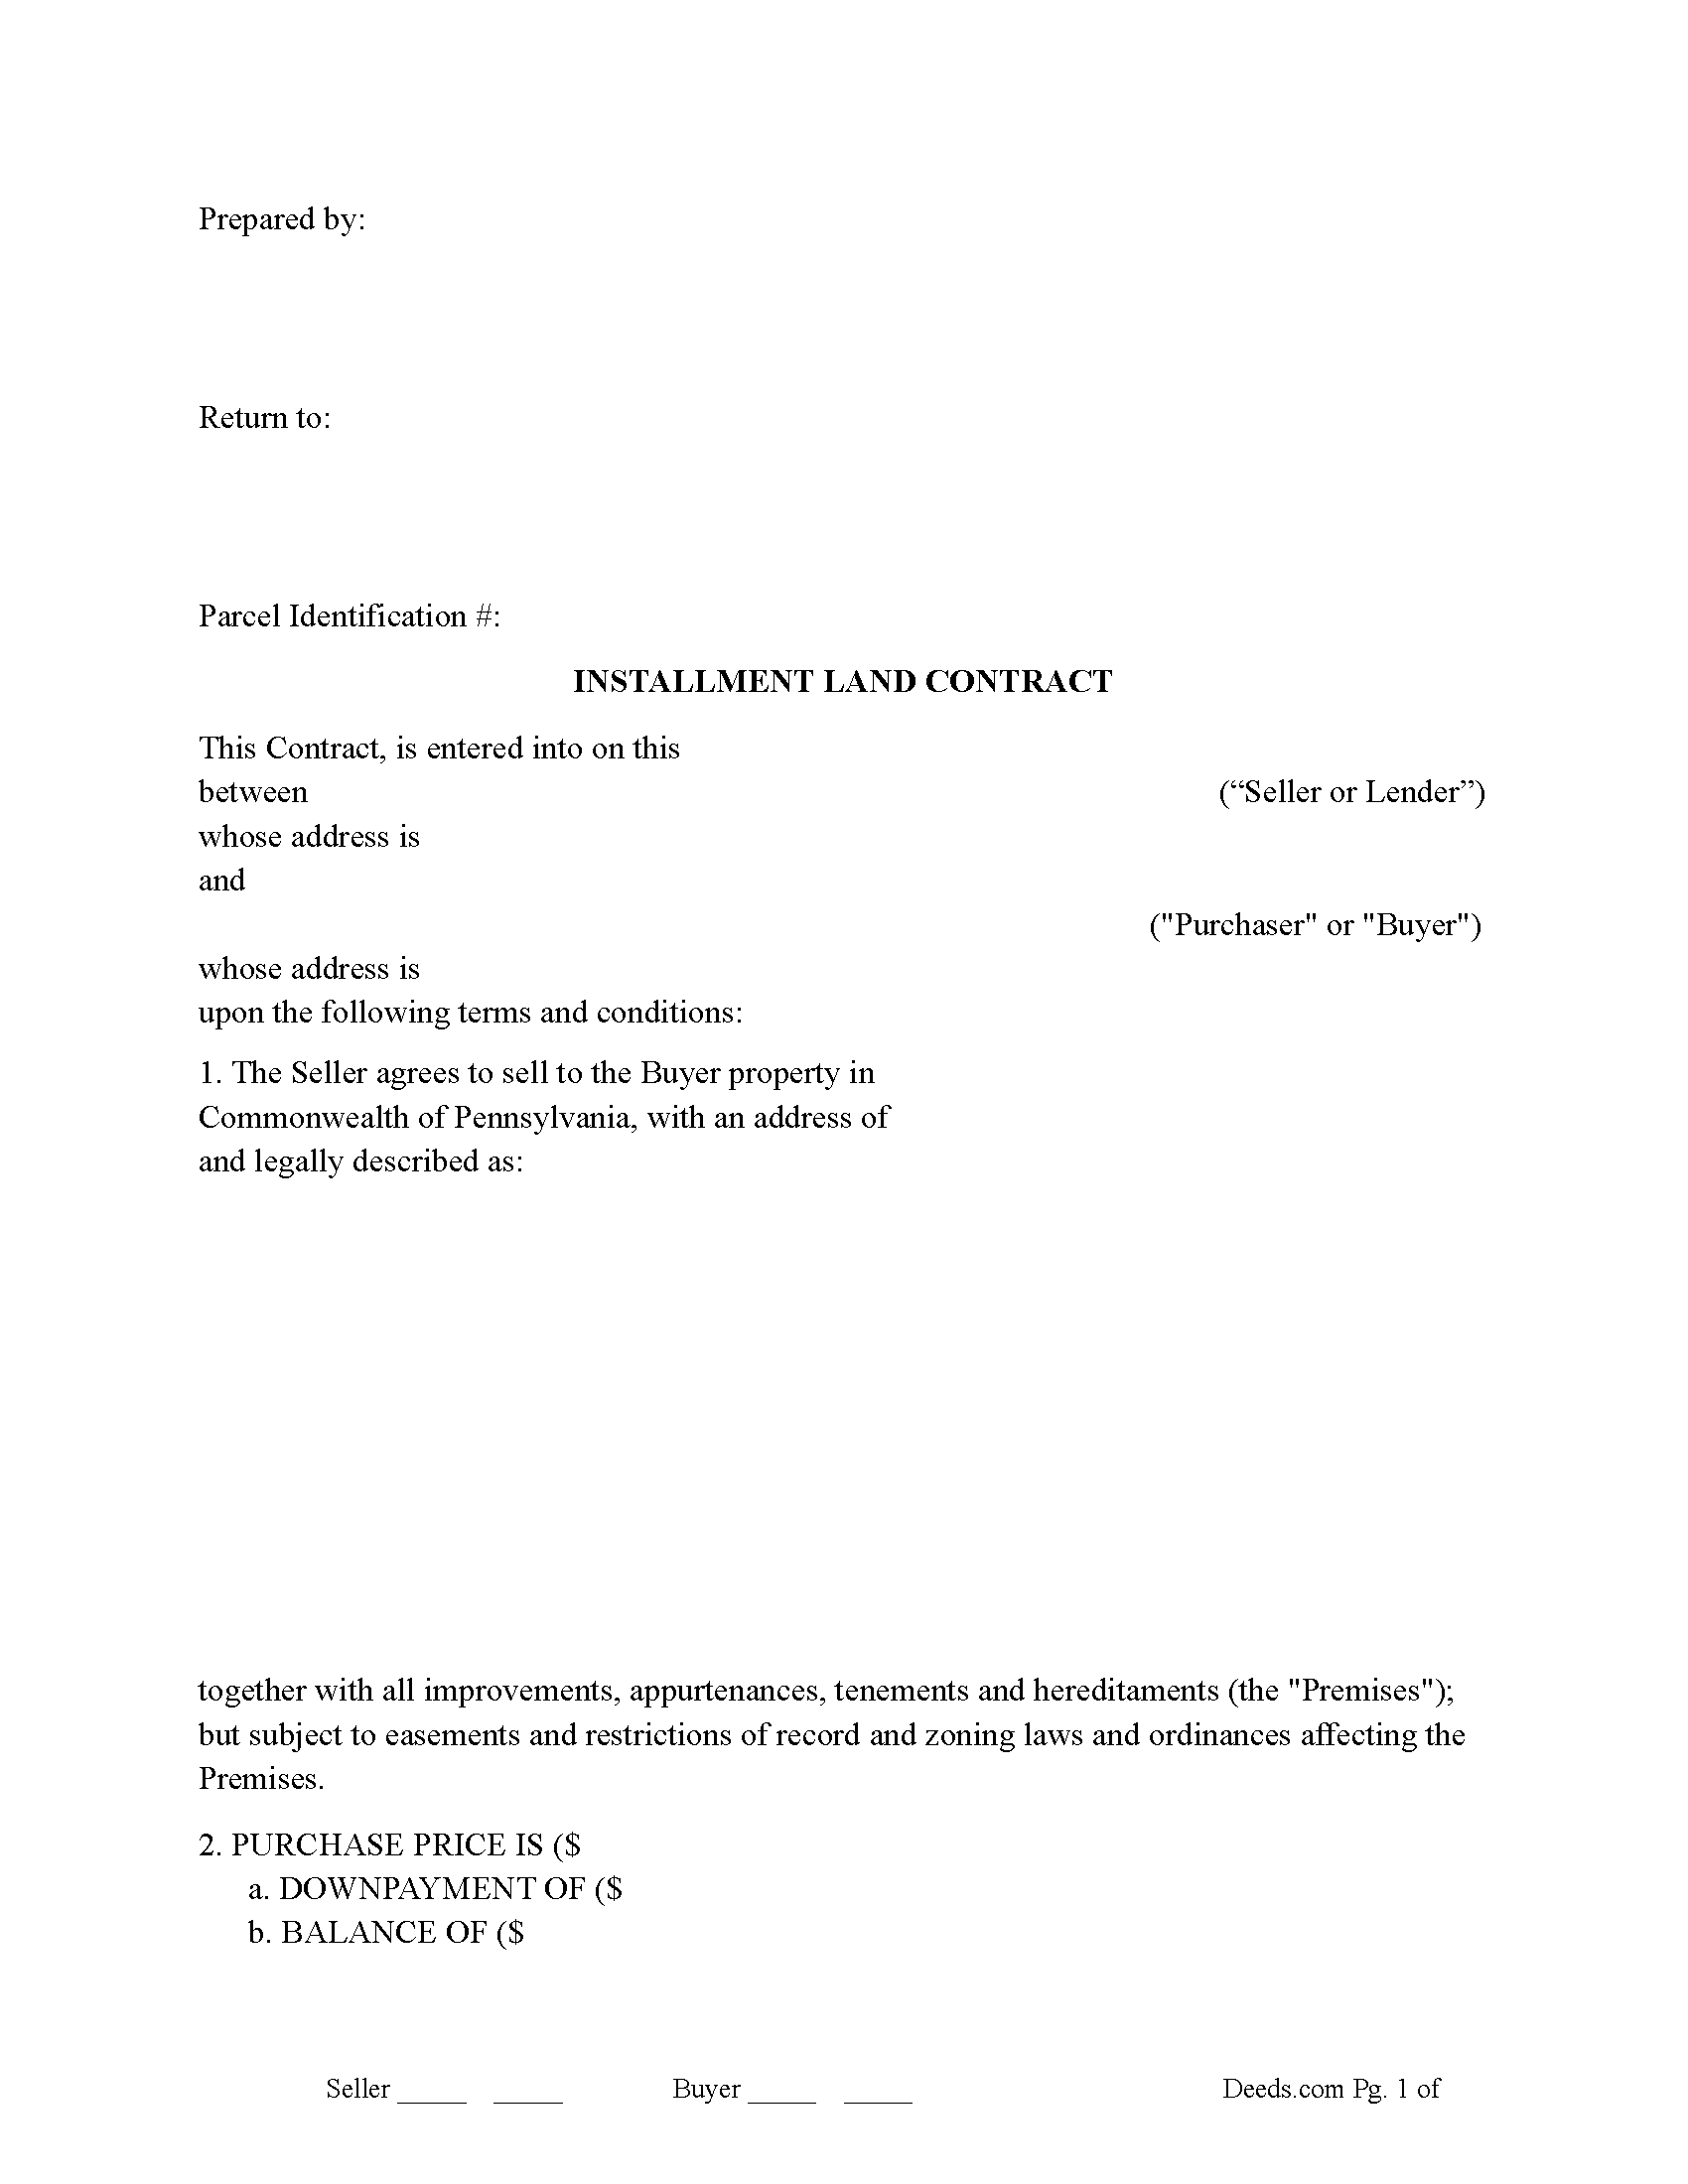 Perry County Installment Land Contract Form